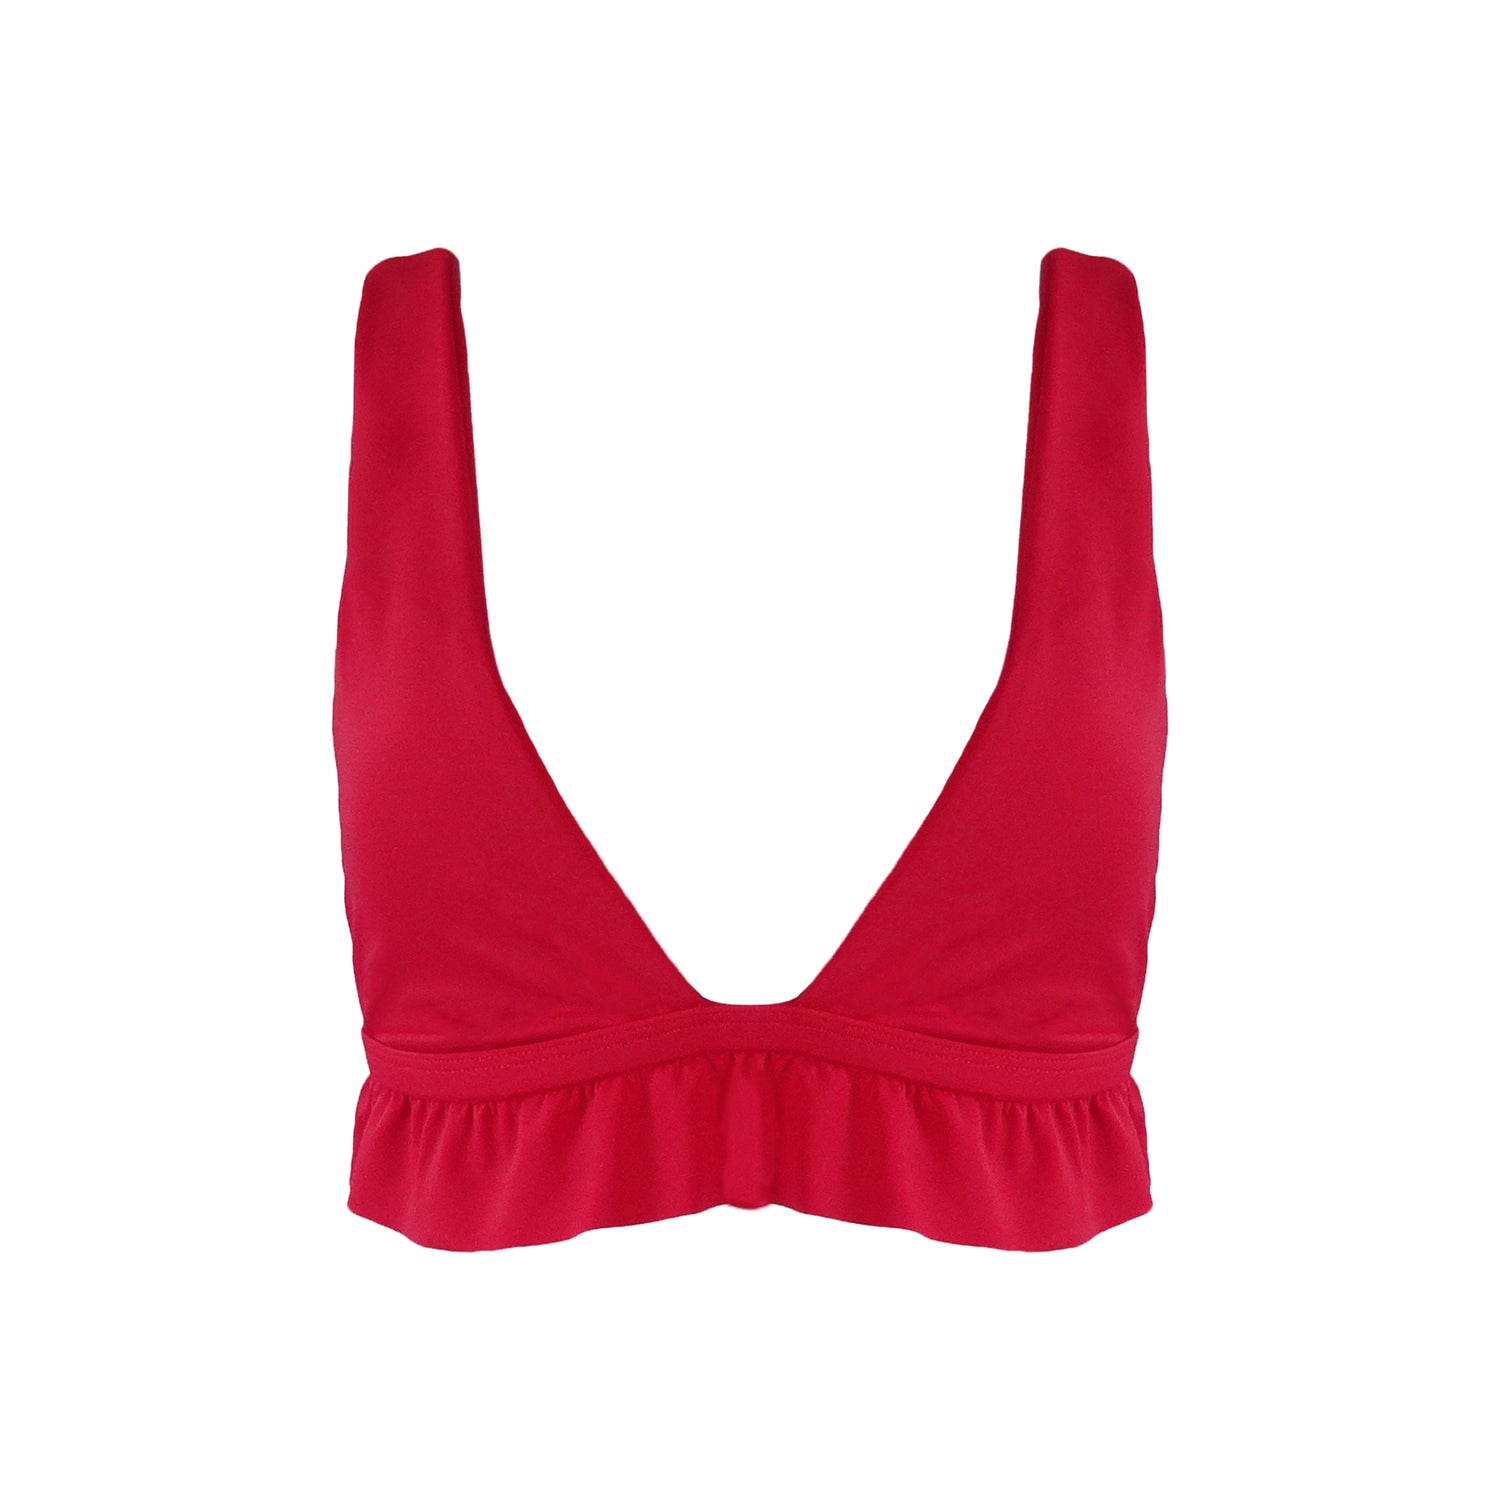 Red bralette style Plunging V-neck bikini top with ruffle hem.